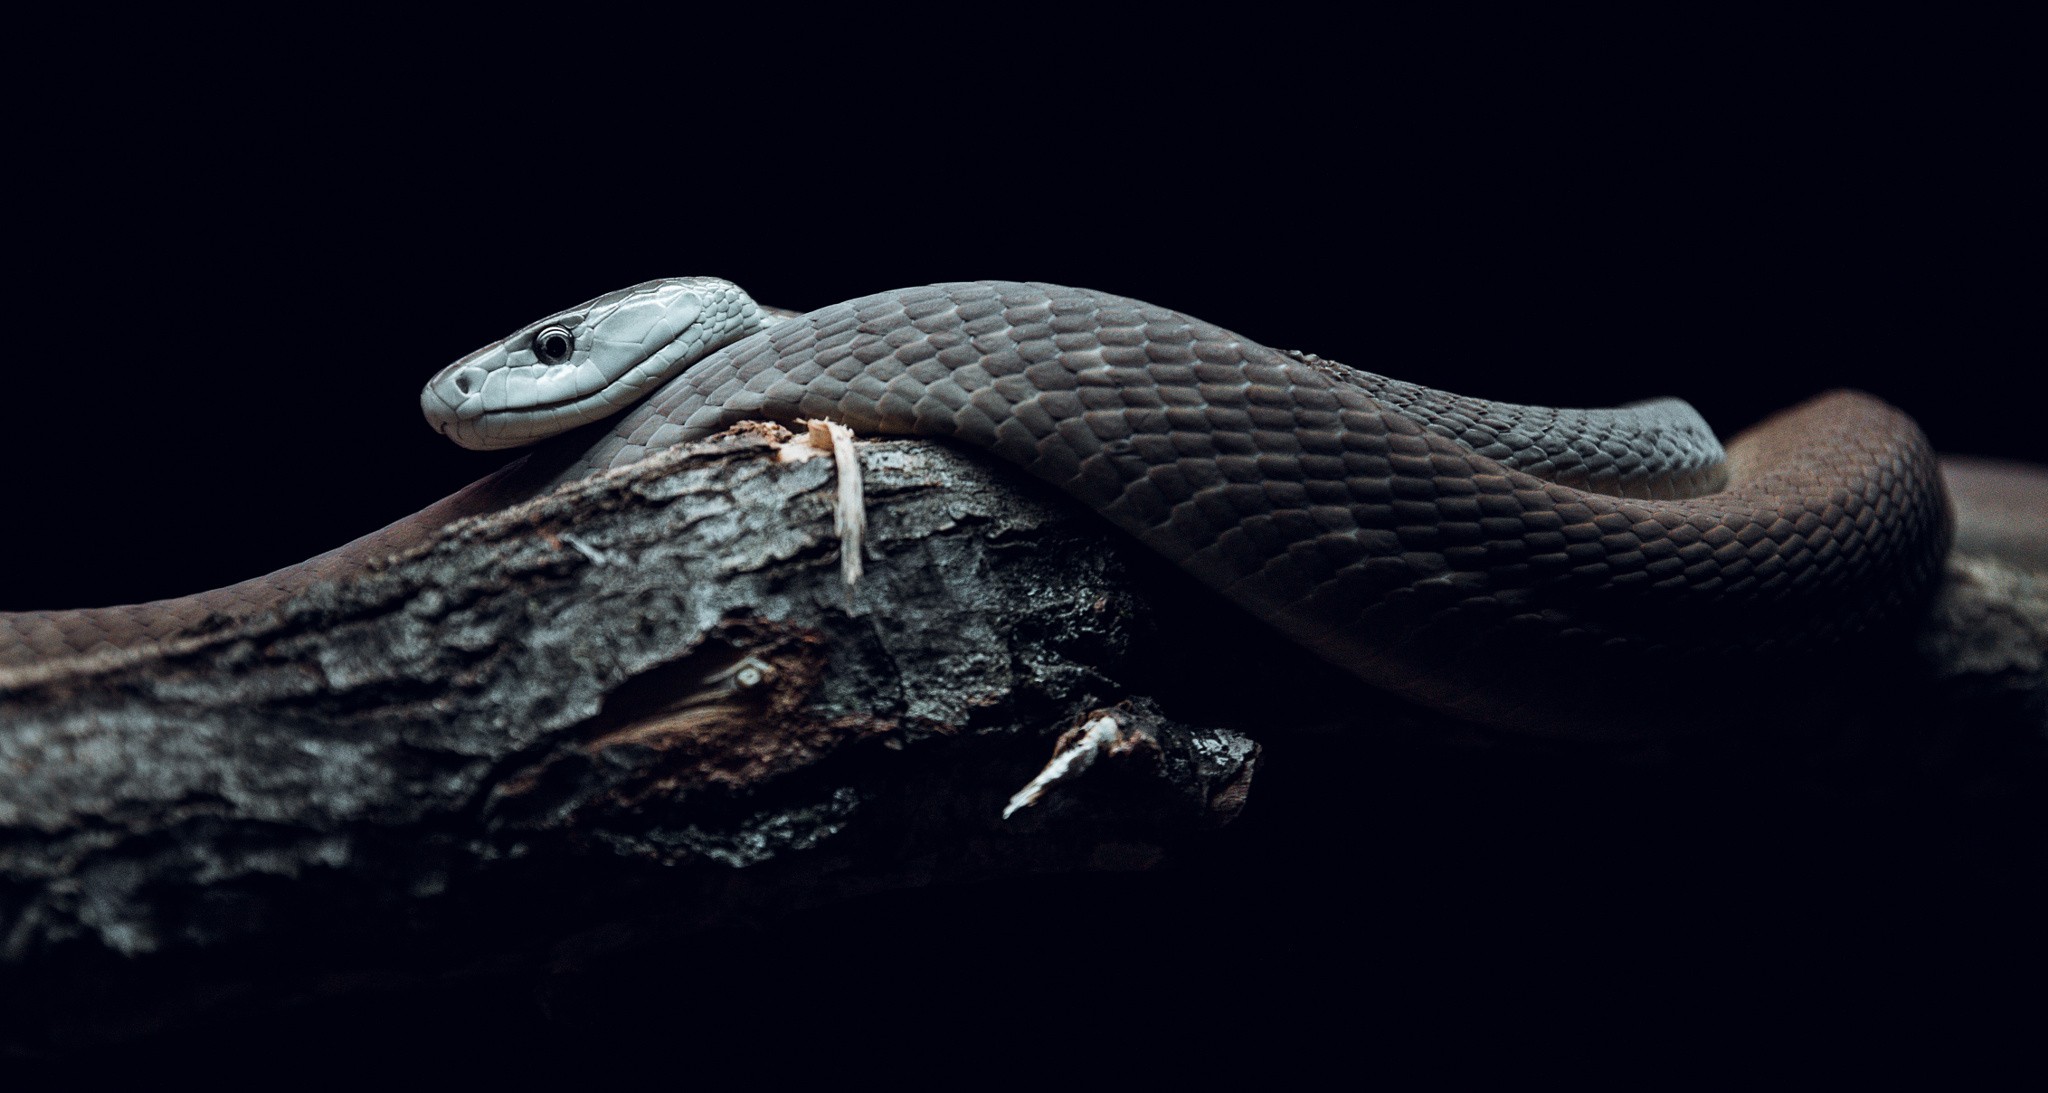 General 2048x1093 nature snake reptiles wildlife photography branch mamba animals black background simple background